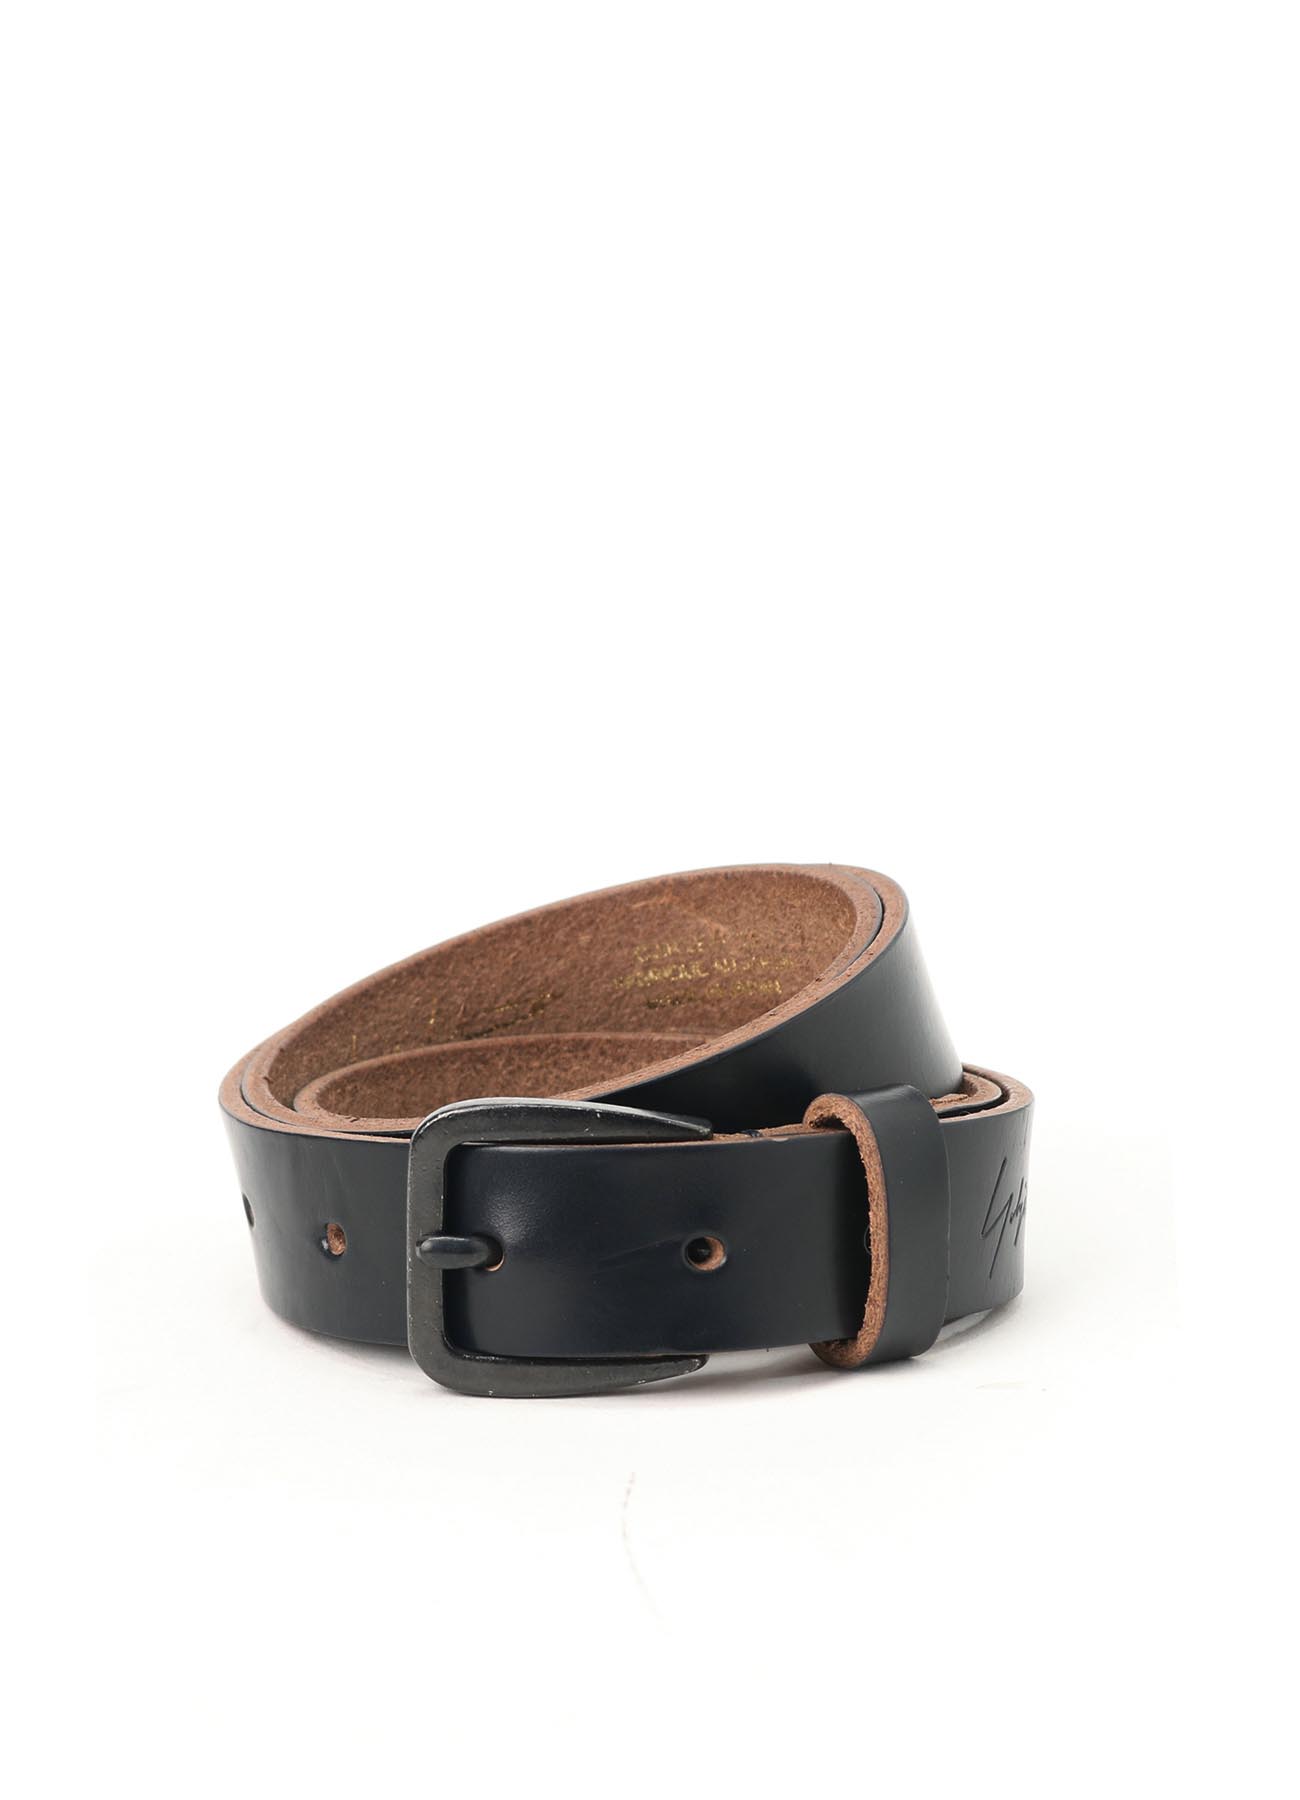 25MM HORWEEN OILED LEATHER BELT